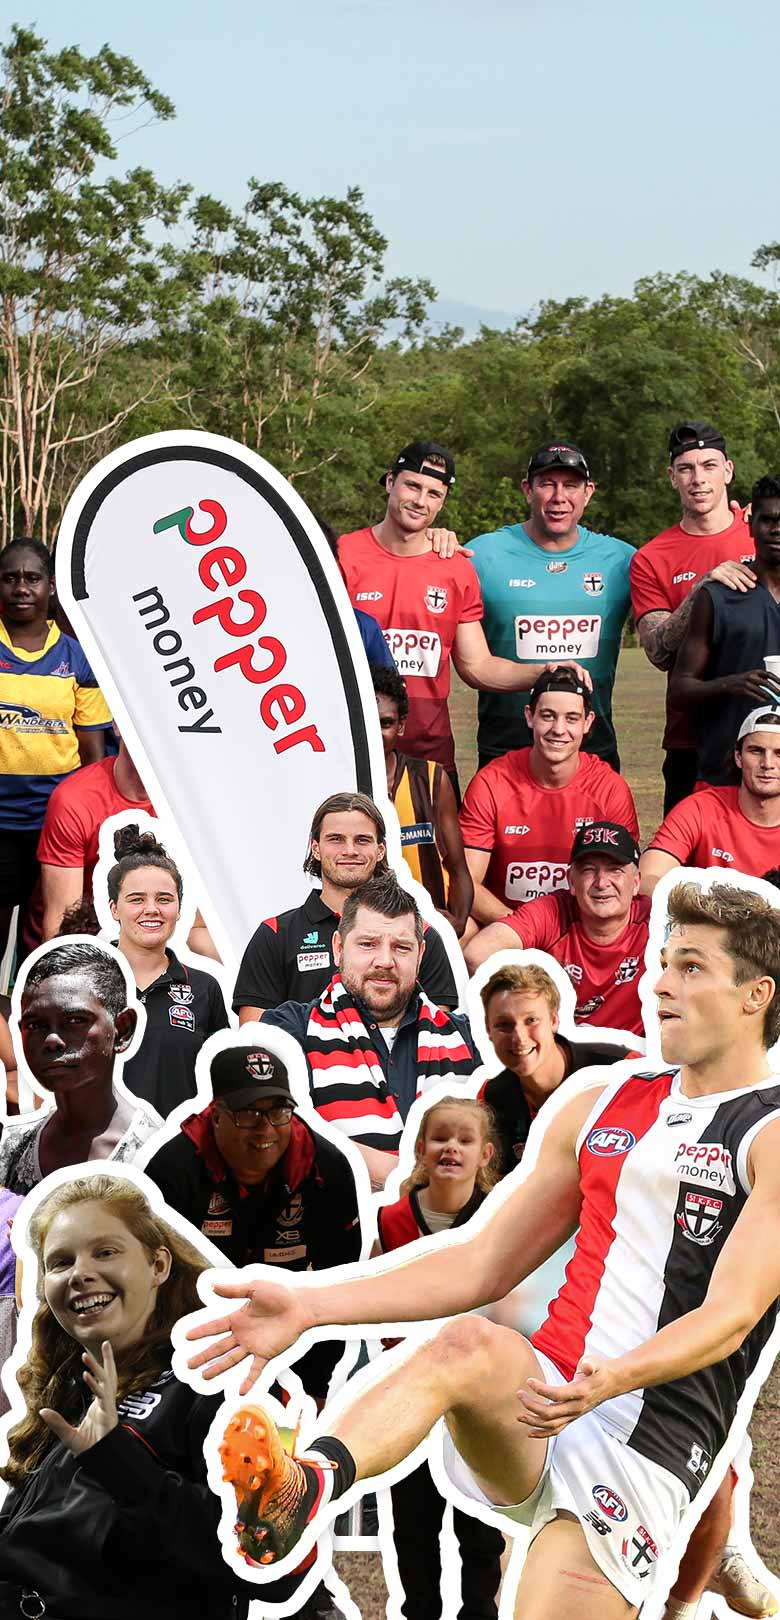 Pepper Money shows support for St Kilda Football Club